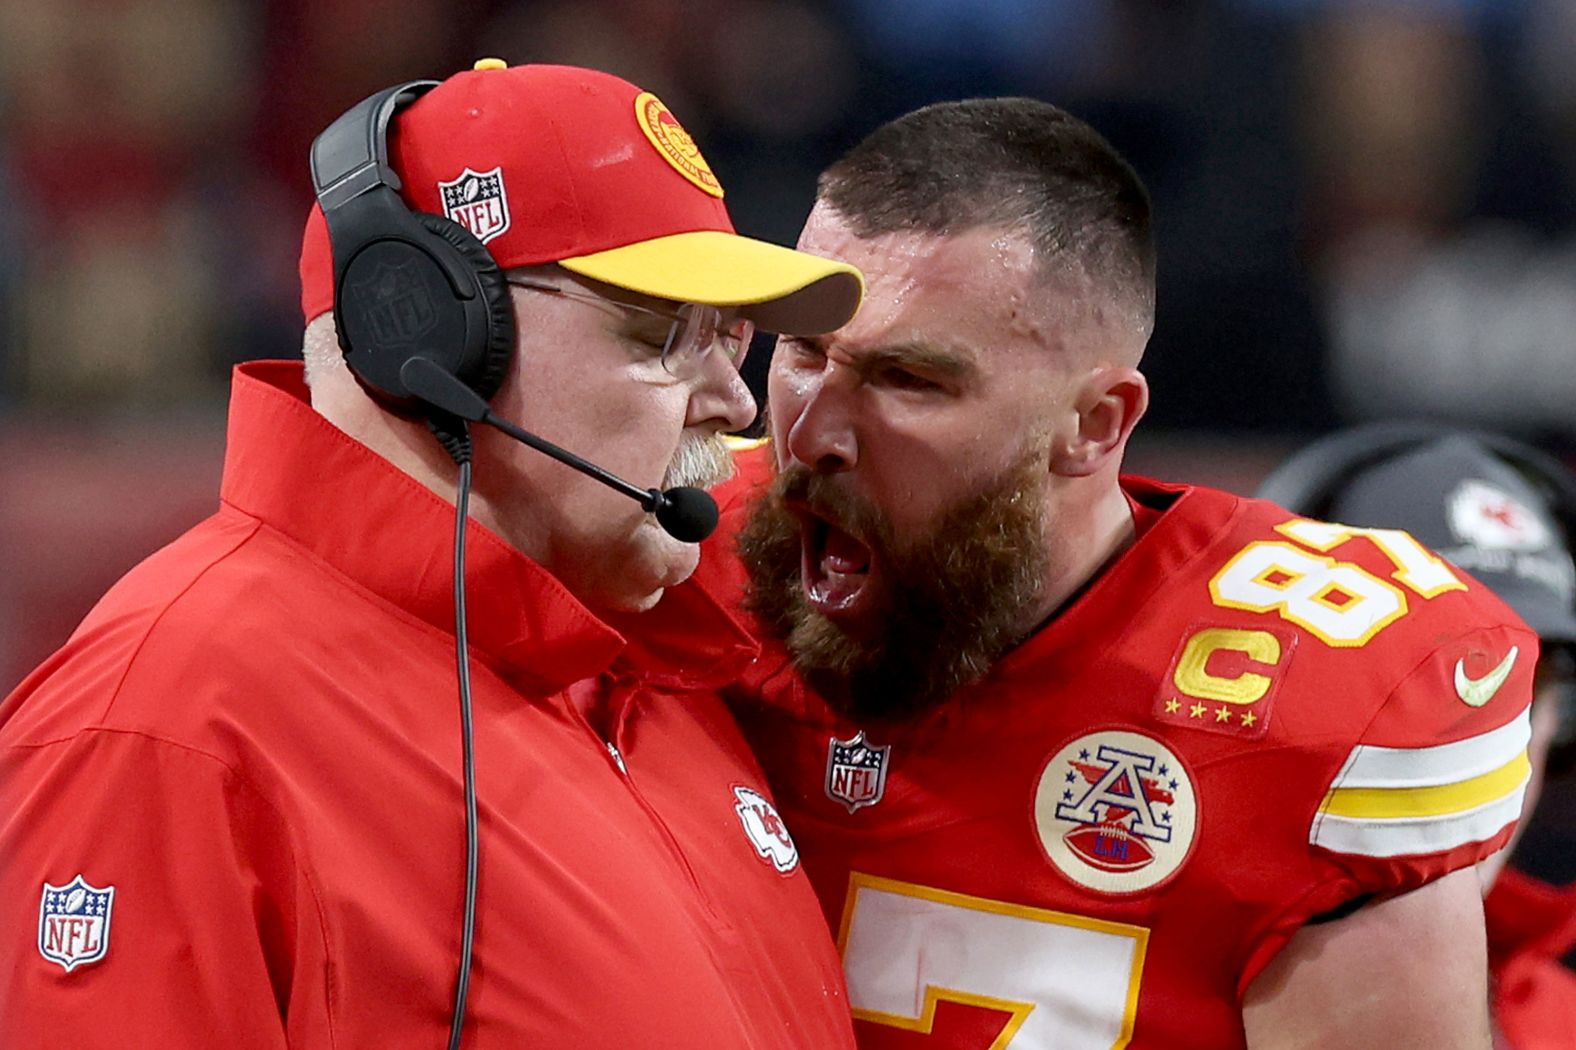 Kansas City Chiefs tight end Travis Kelce yells at head coach Andy Reid after a first-half play in <a href="index.php?page=&url=http%3A%2F%2Fwww.cnn.com%2F2024%2F02%2F11%2Fsport%2Fgallery%2Fbest-photos-super-bowl-lviii%2Findex.html" target="_blank">Super Bowl LVIII</a> on Sunday, February 11. Kelce also bumped into Reid, knocking him a little off balance. Reid laughed off the incident after the game, which the Chiefs won 25-22 in overtime. But <a href="index.php?page=&url=https%3A%2F%2Fwww.cnn.com%2F2024%2F02%2F14%2Fsport%2Ftravis-kelce-push-andy-reid-explain-spt-intl%2Findex.html" target="_blank">Kelce said on his podcast this week</a> that he went too far and it was "definitely unacceptable."